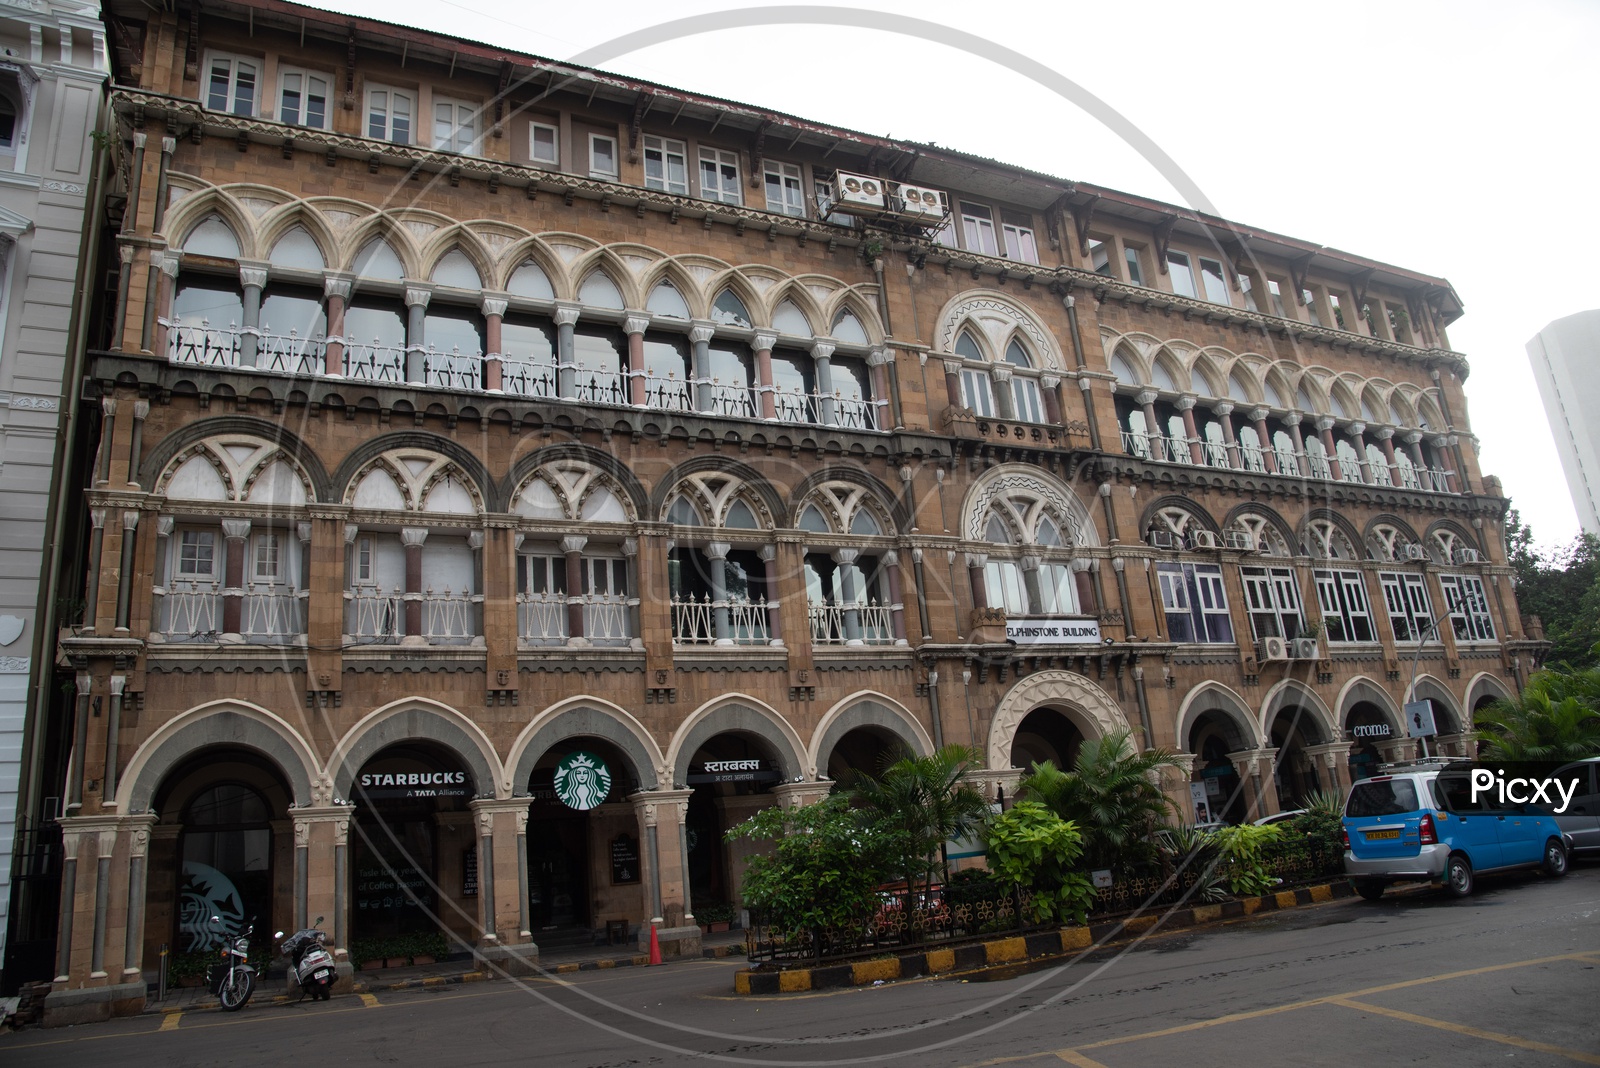 Elphinstone Building which Houses Starbucks Cafe and Hermes Luxury Boutique